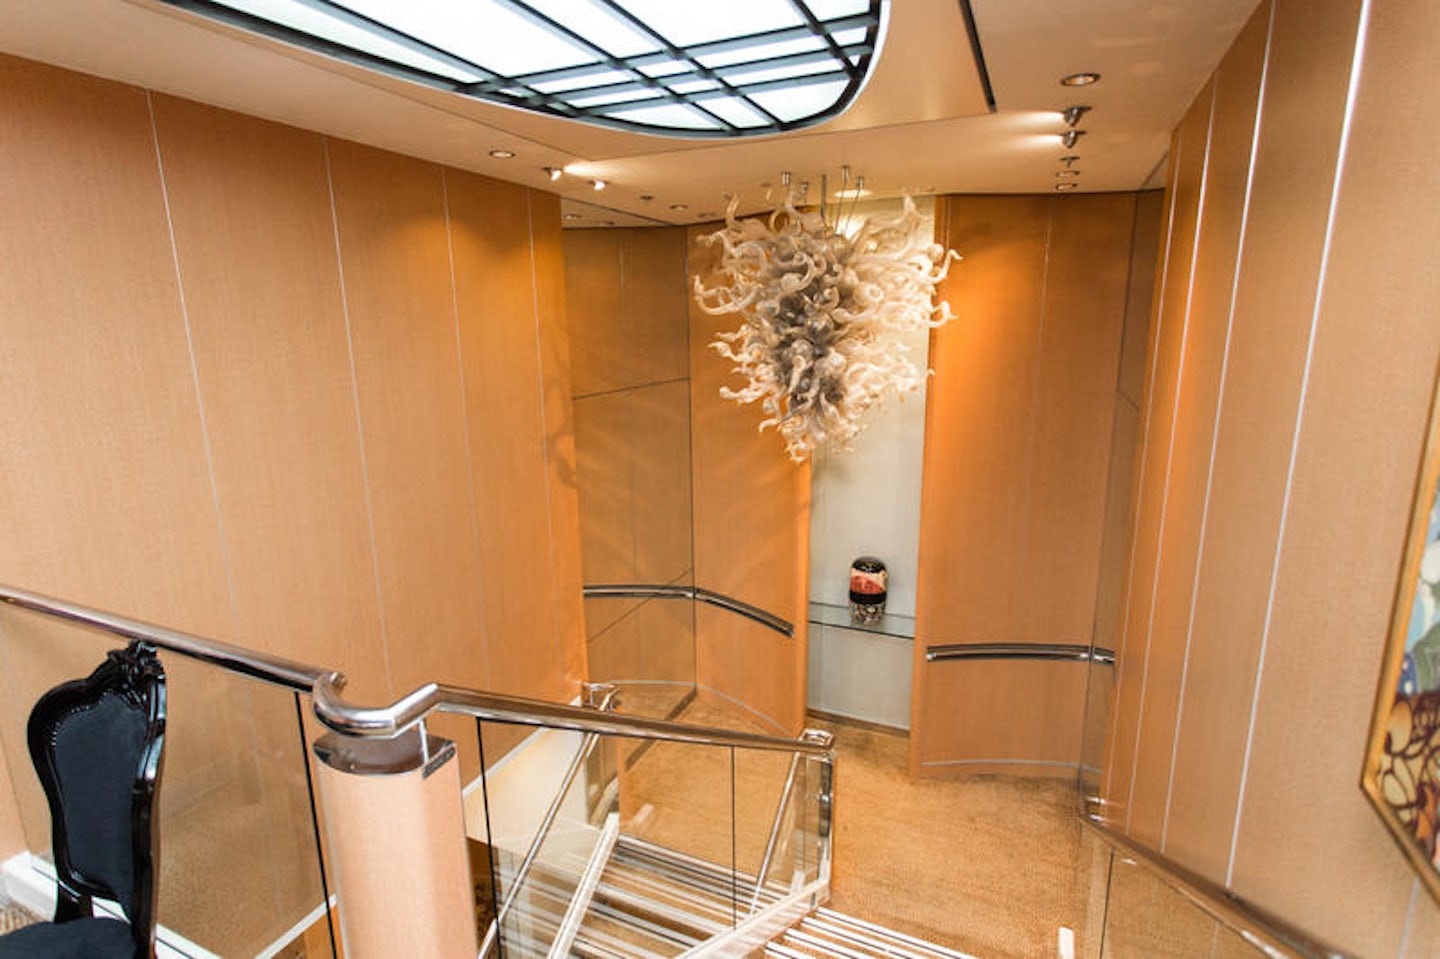 Stairs on Celebrity Infinity